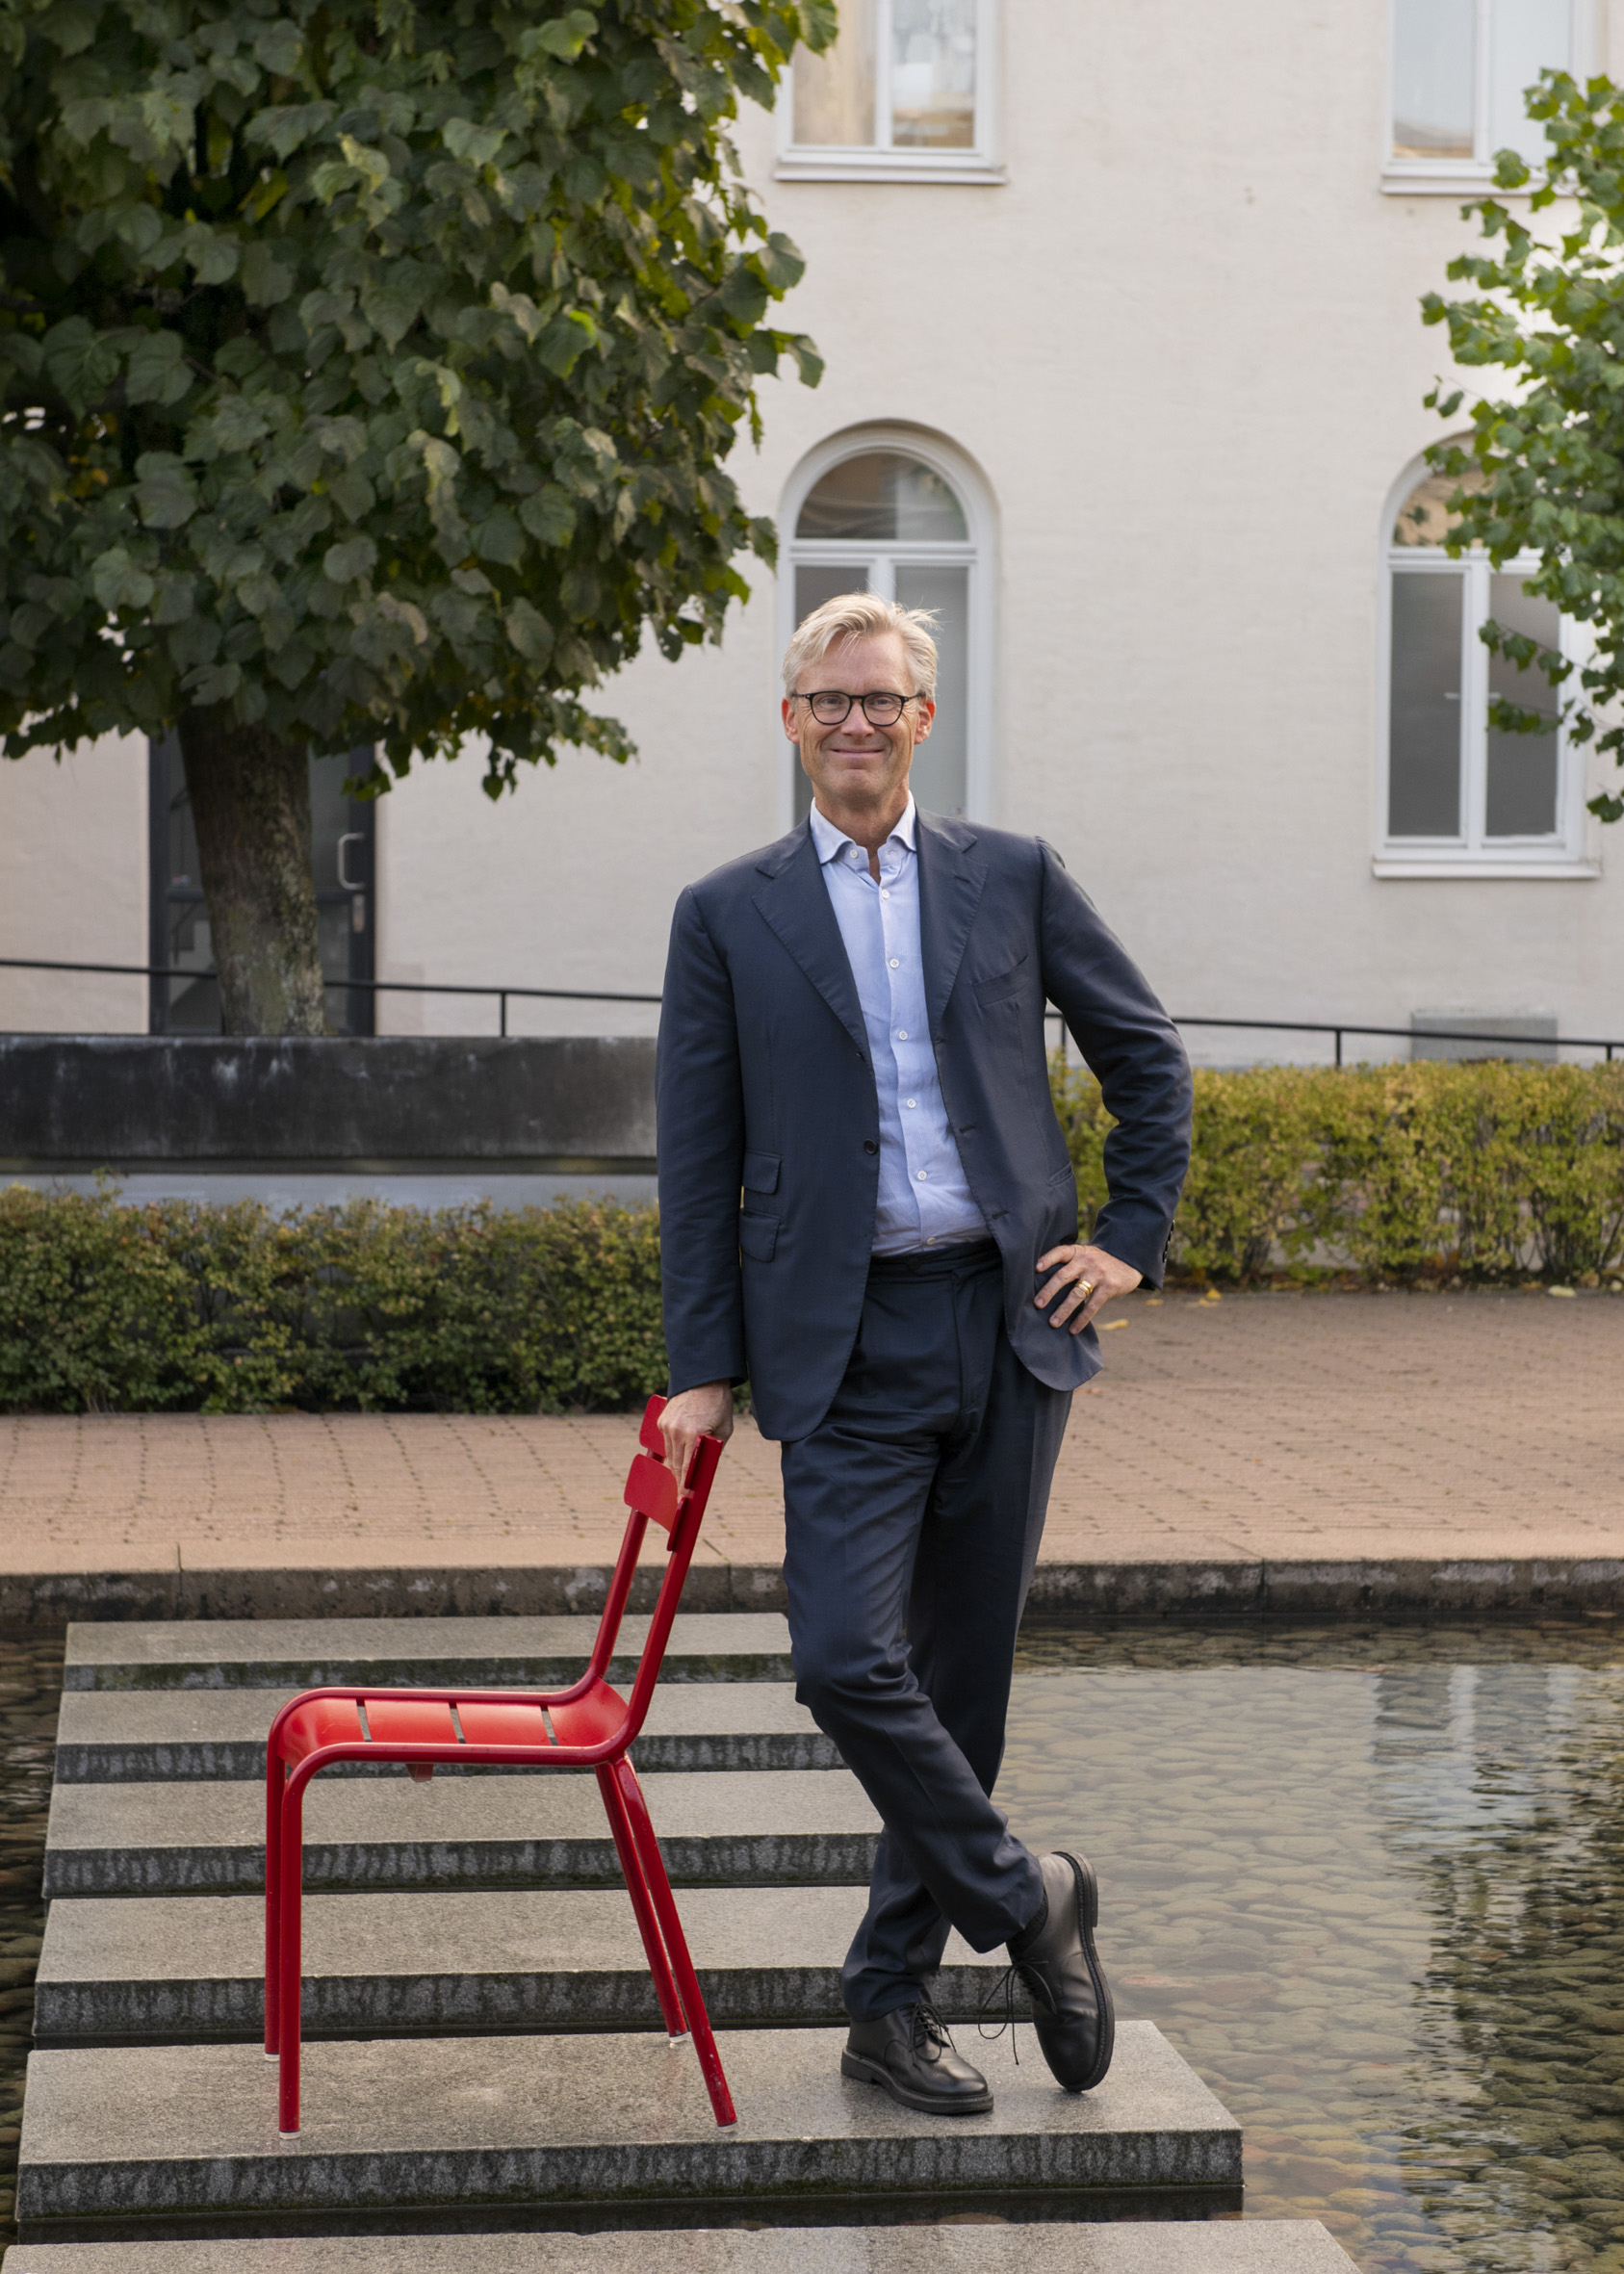 Måns Nilsson is Executive Director at SEI